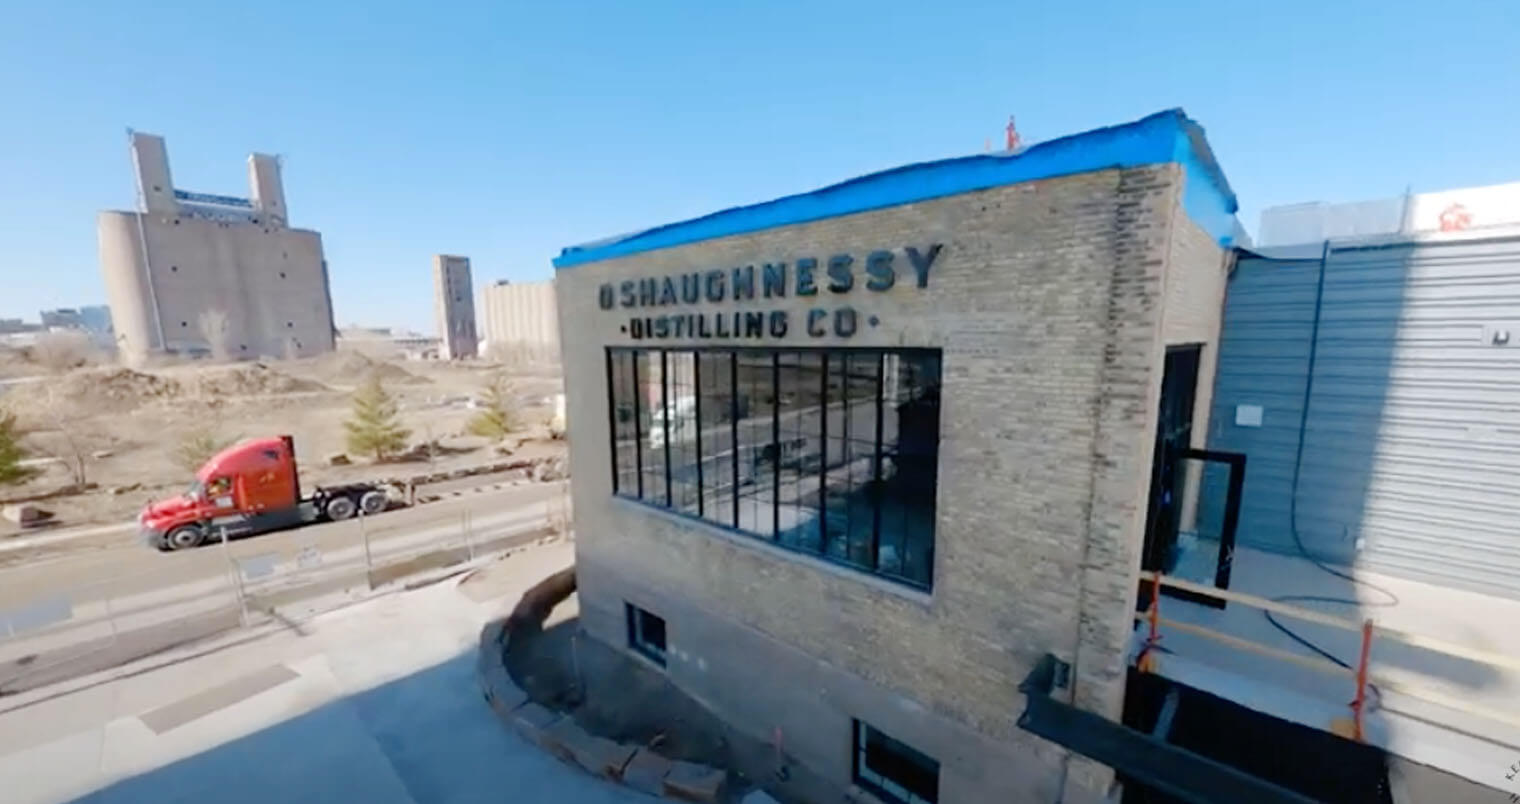 Drone Distillery Tour, featured image